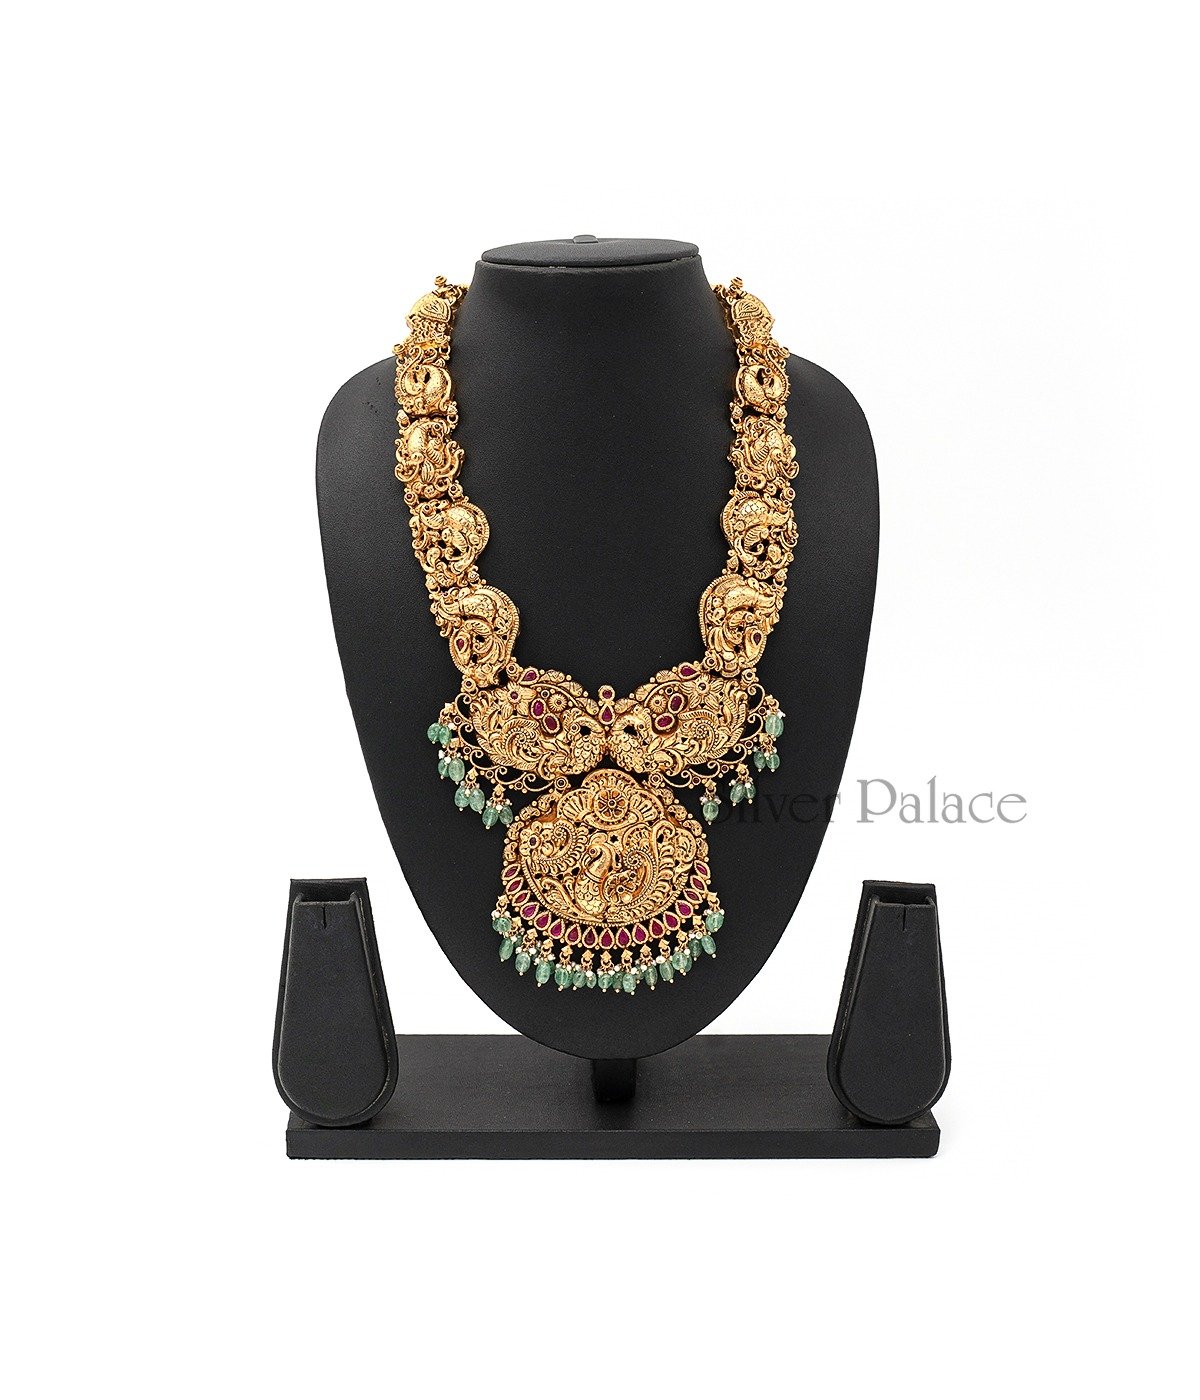 GOLD POLISHED TRADITIONAL LONG HARA WITH GREEN BEADS